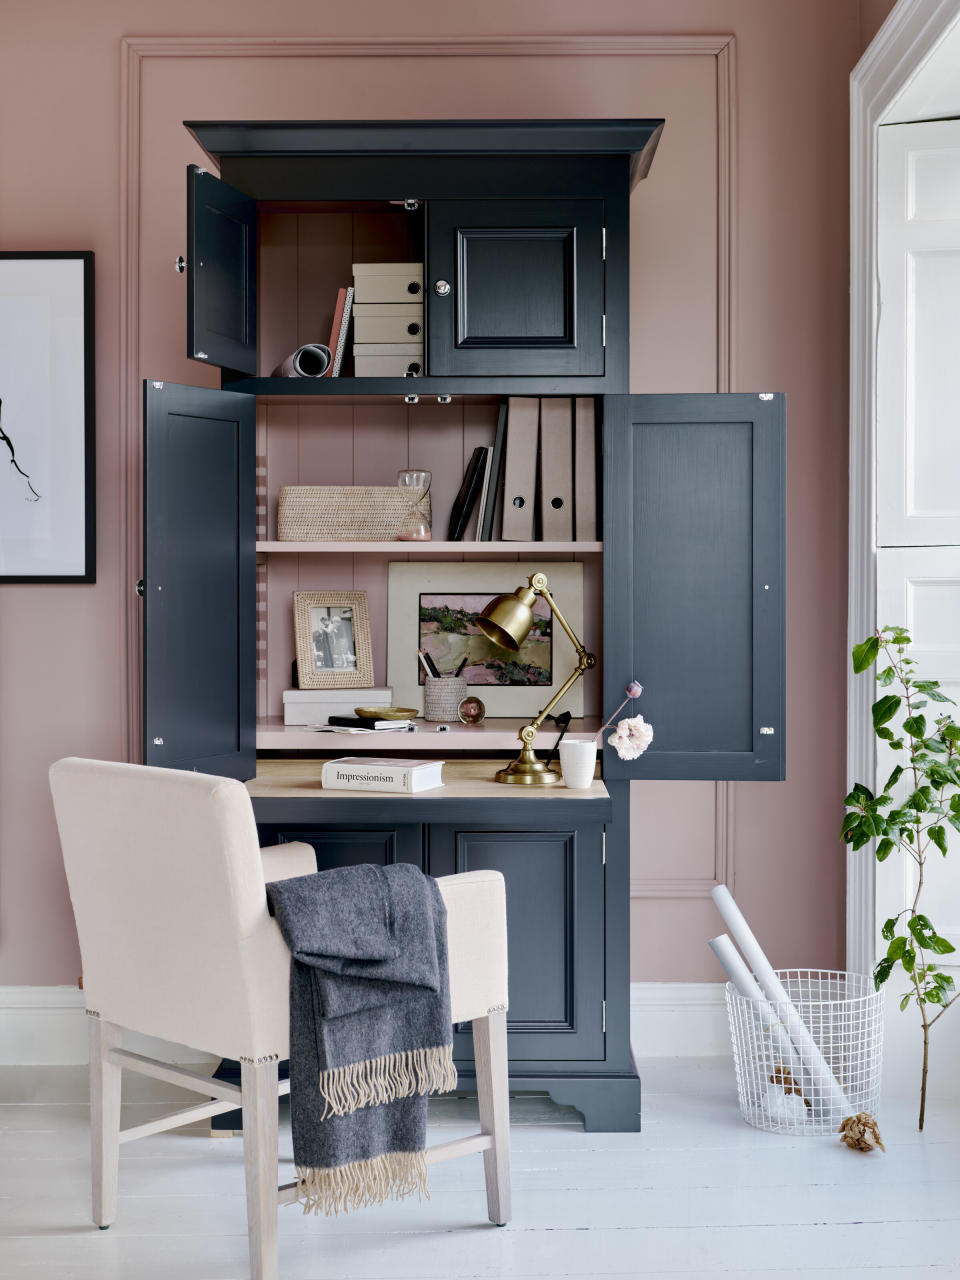 10. Consider a freestanding storage unit in small space